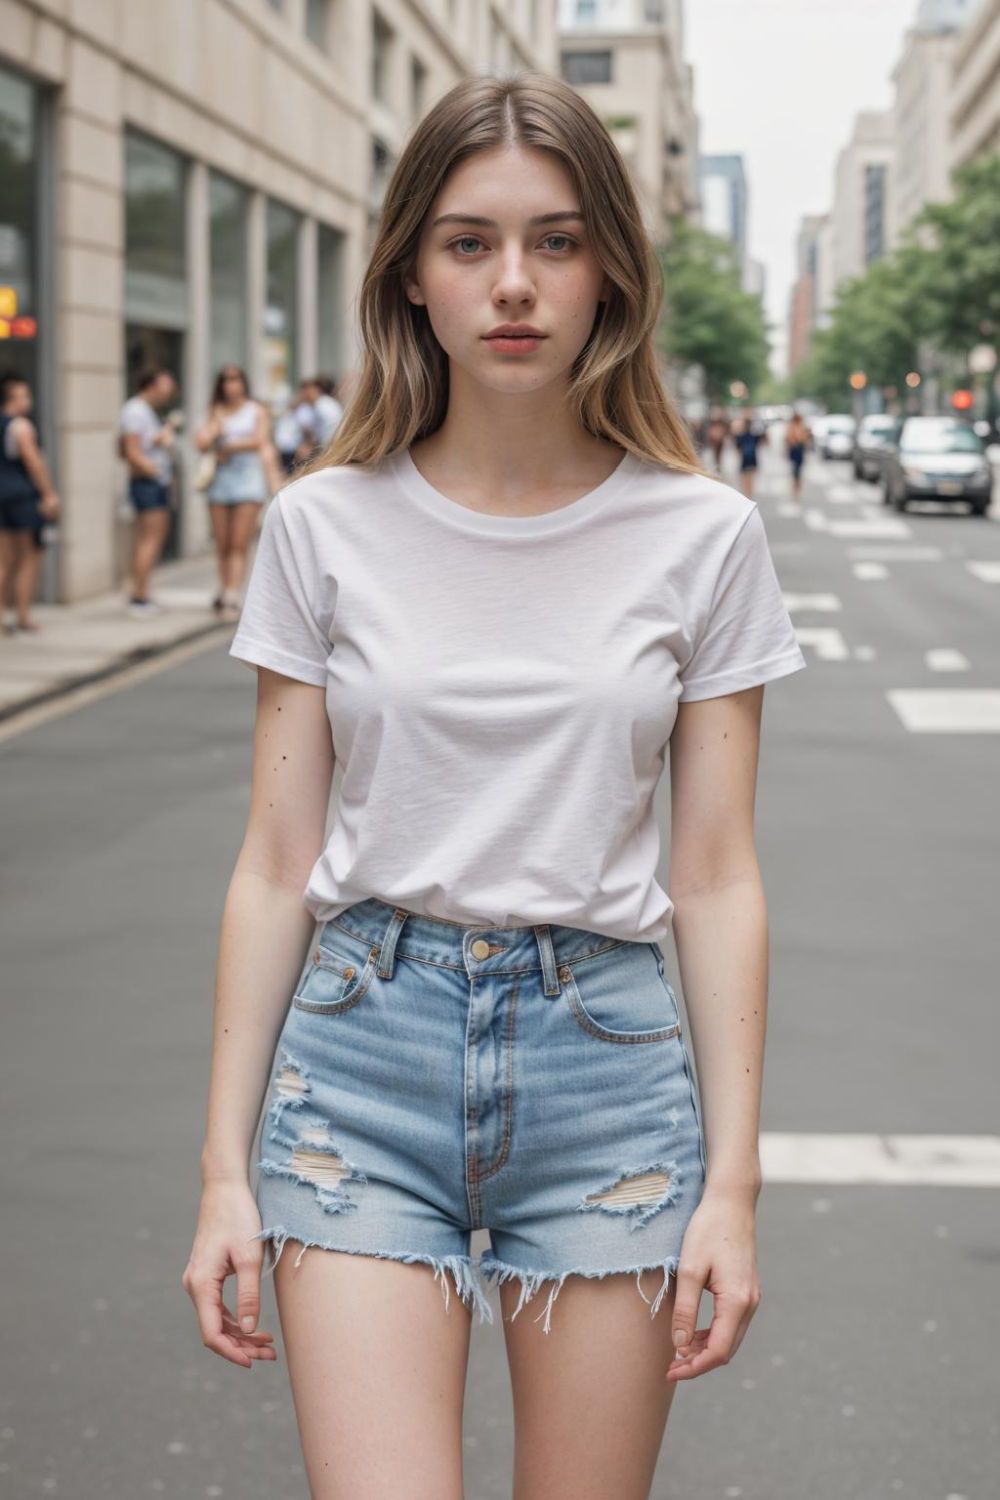 the classic white tee and denim shorts combo